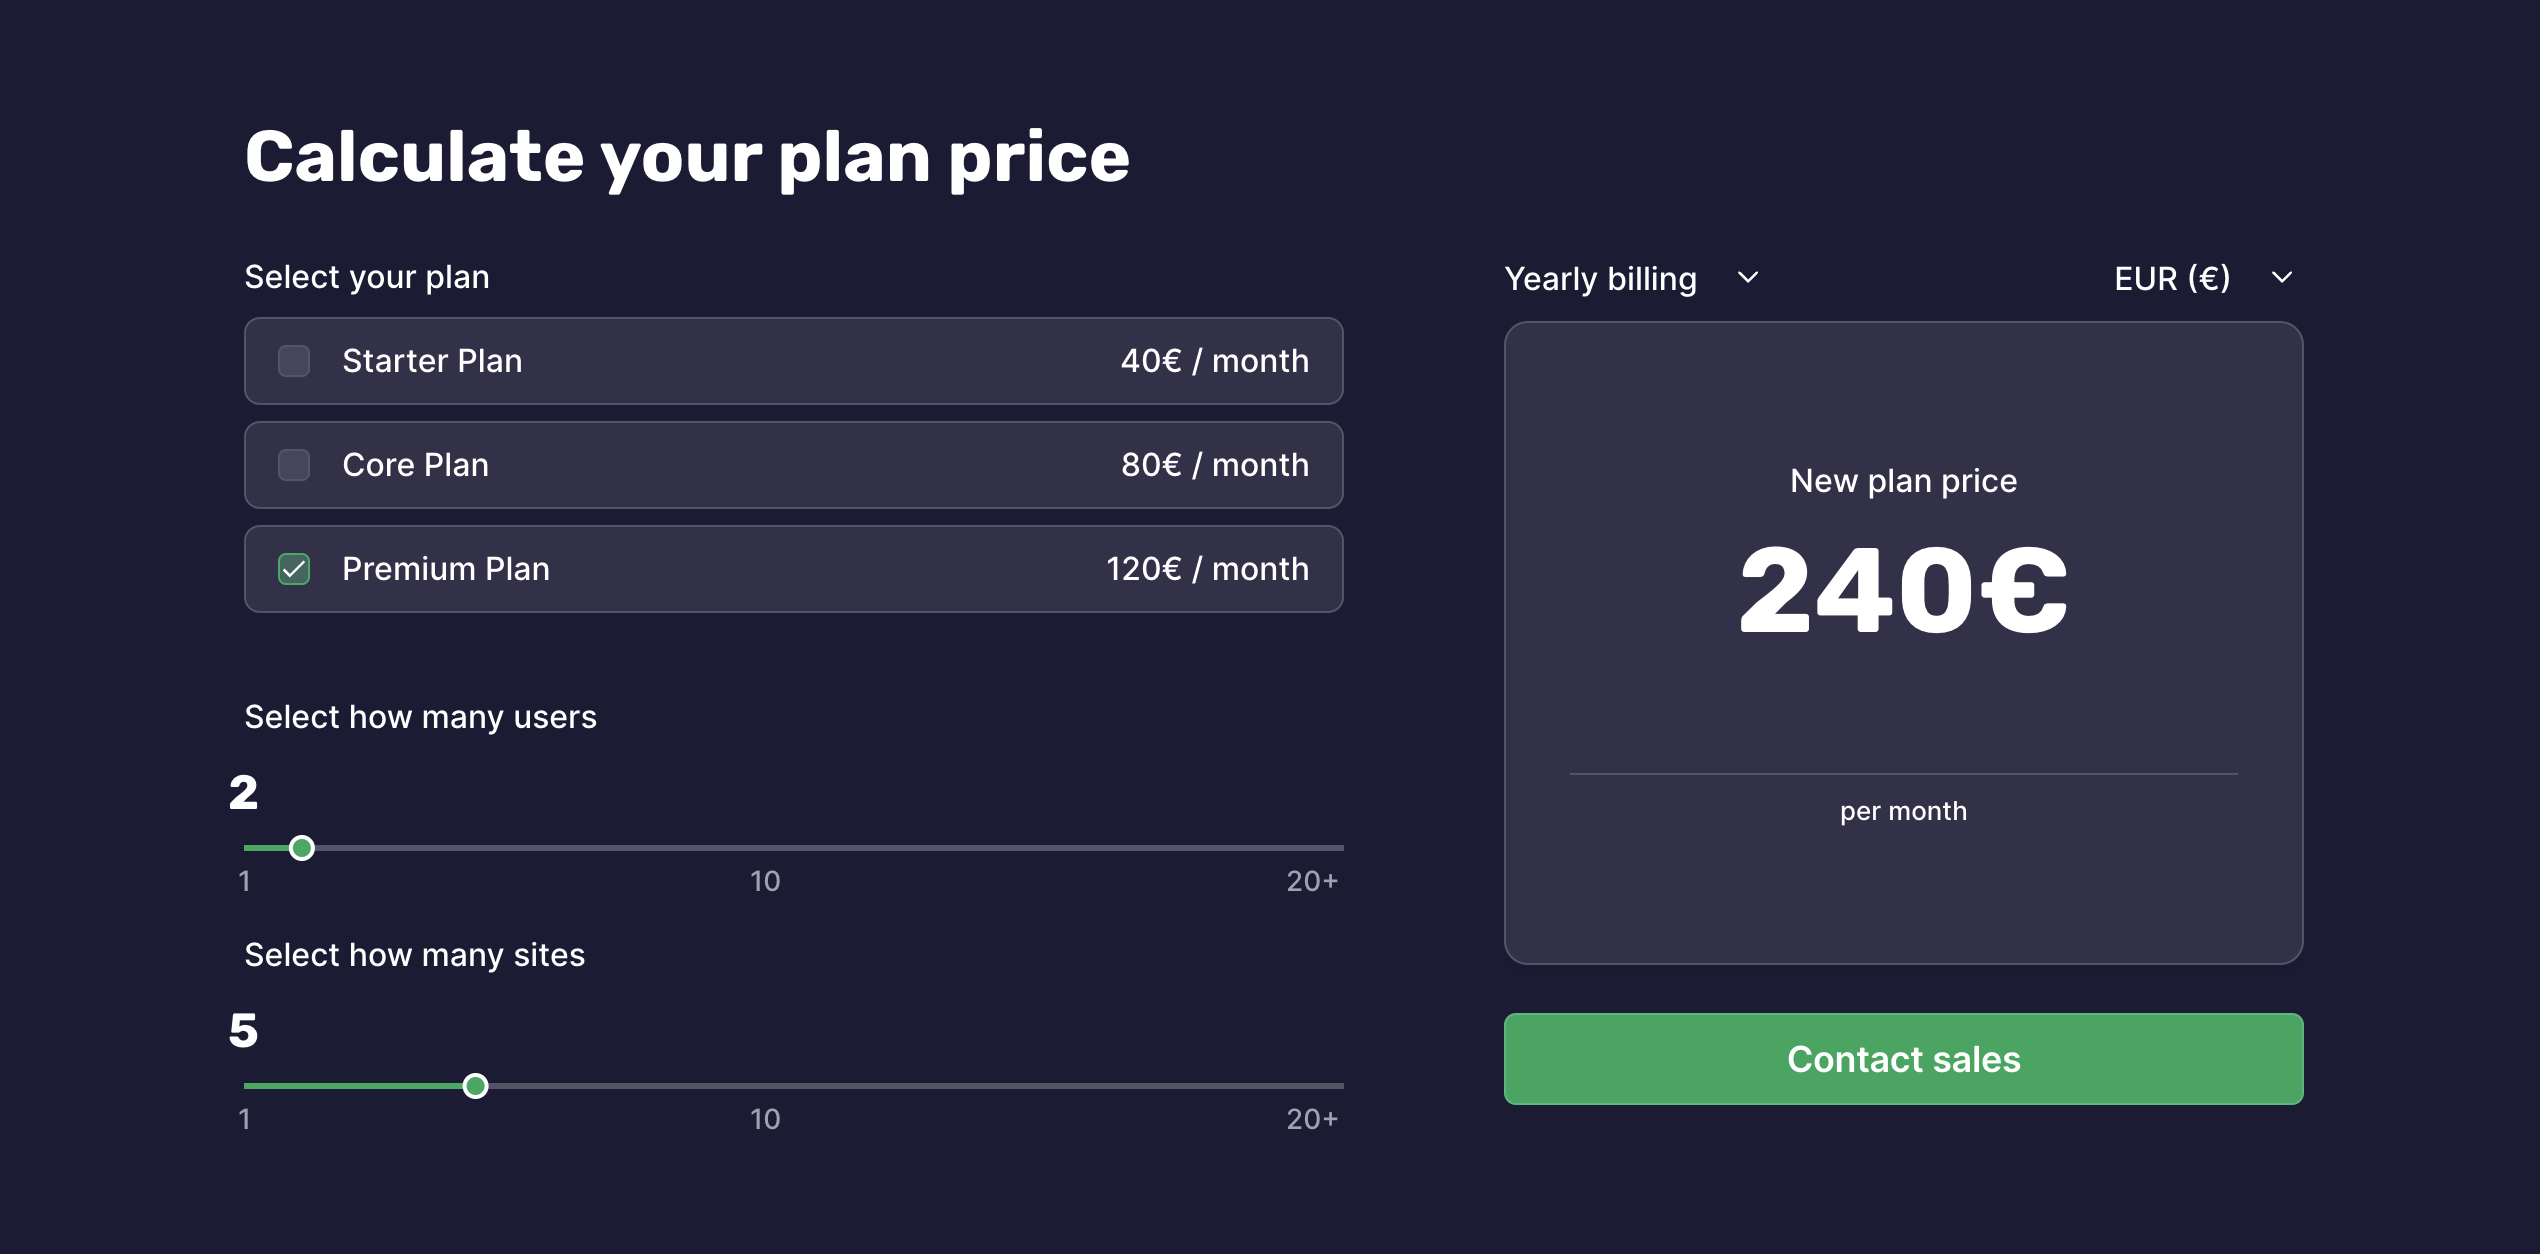 Use price calculators to compare pricing across subscription tiers